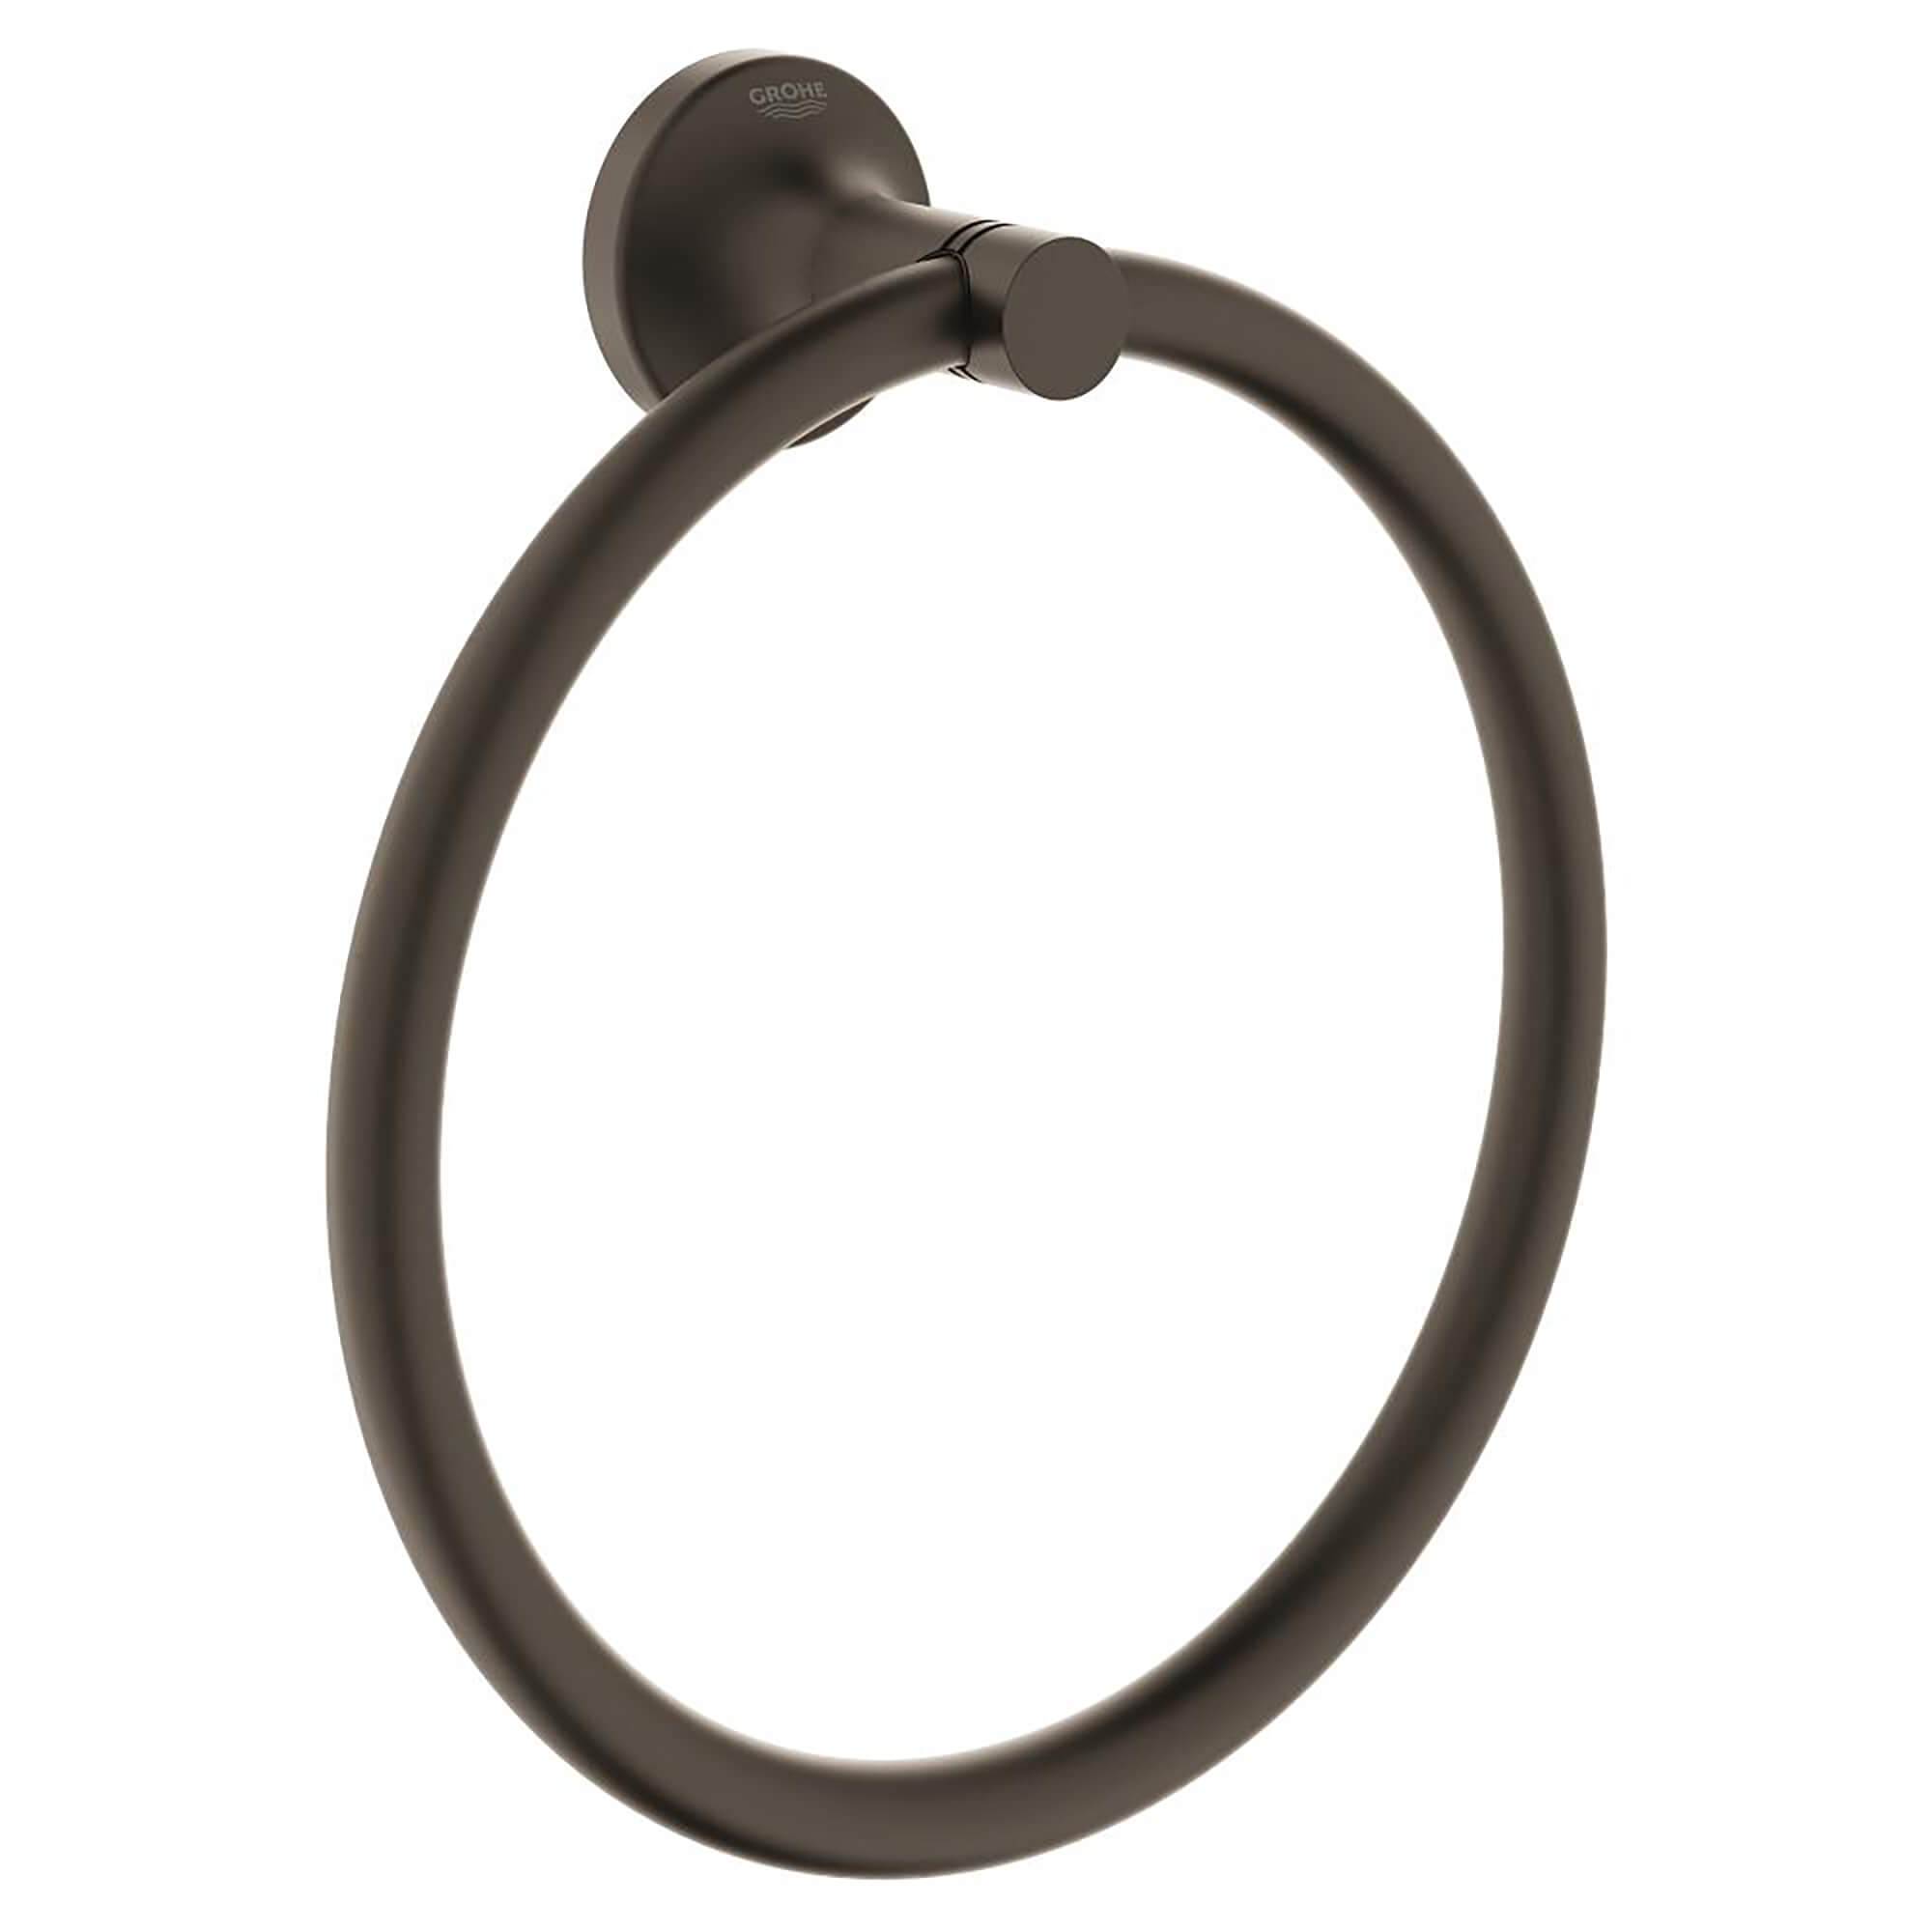 Towel Ring GROHE OIL RUBBED BRONZE